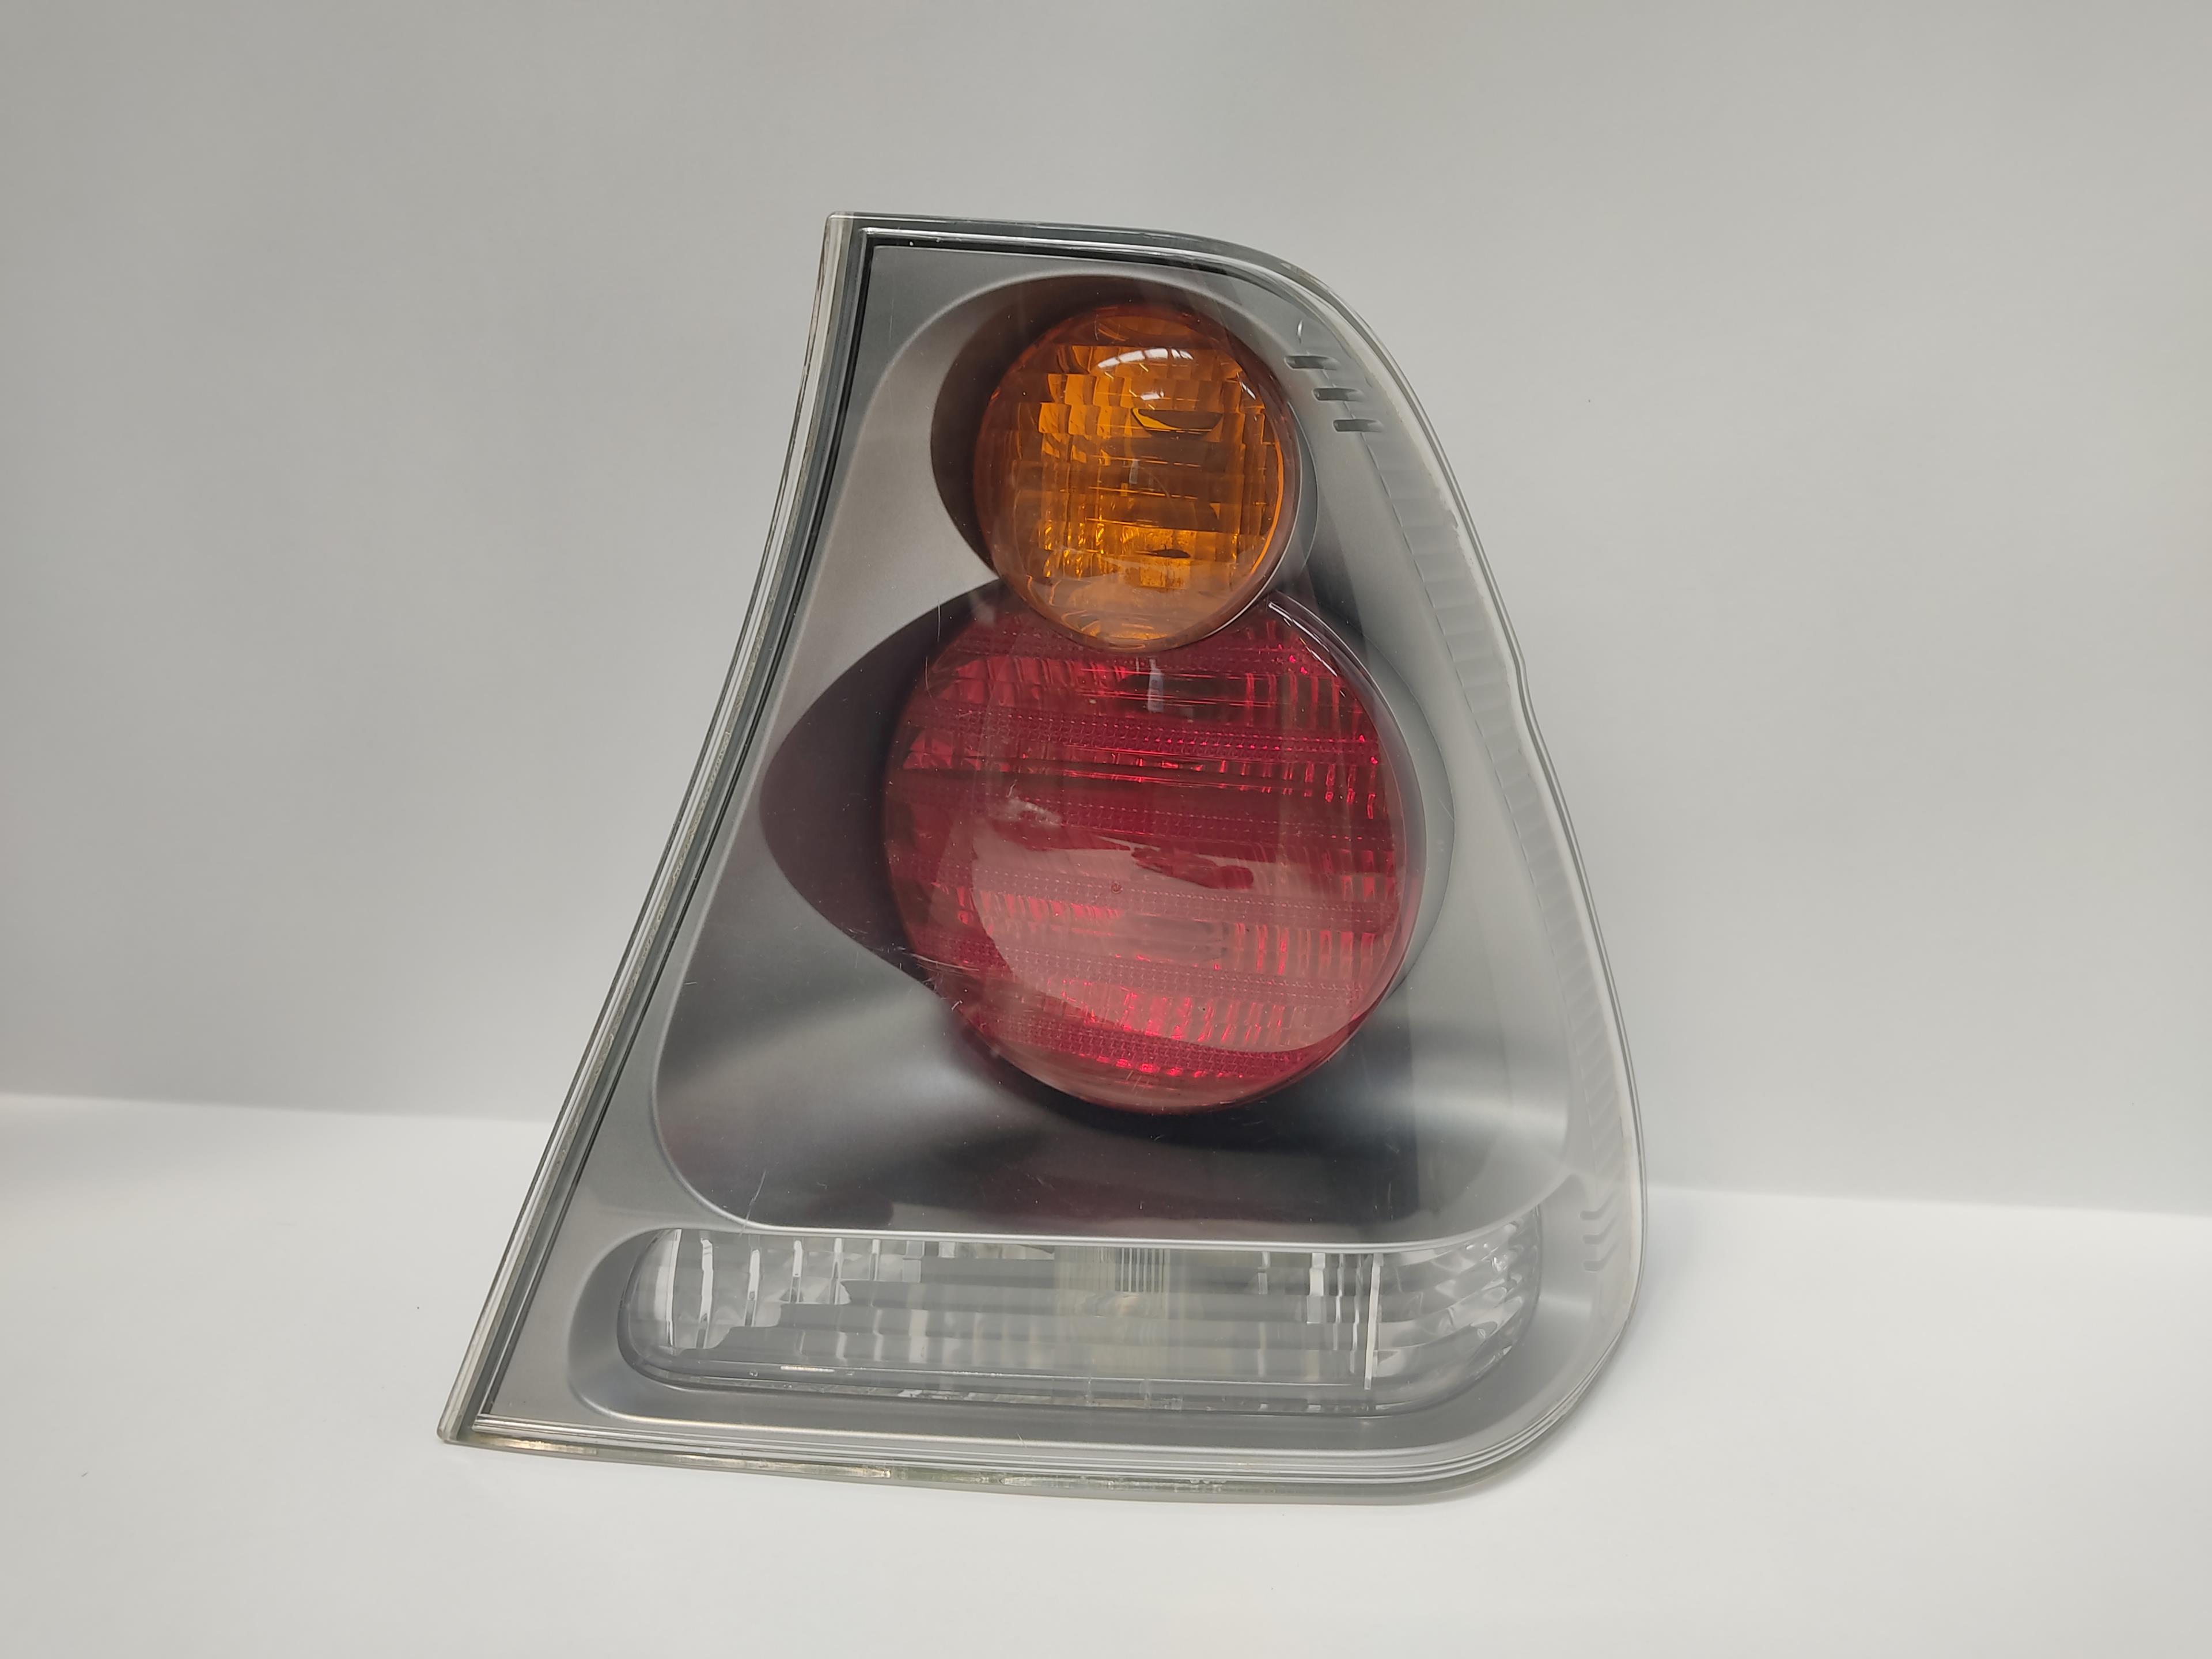 BMW 3 Series E46 (1997-2006) Rear Right Taillight Lamp 63216920248, 63216920, 6920248 24463369